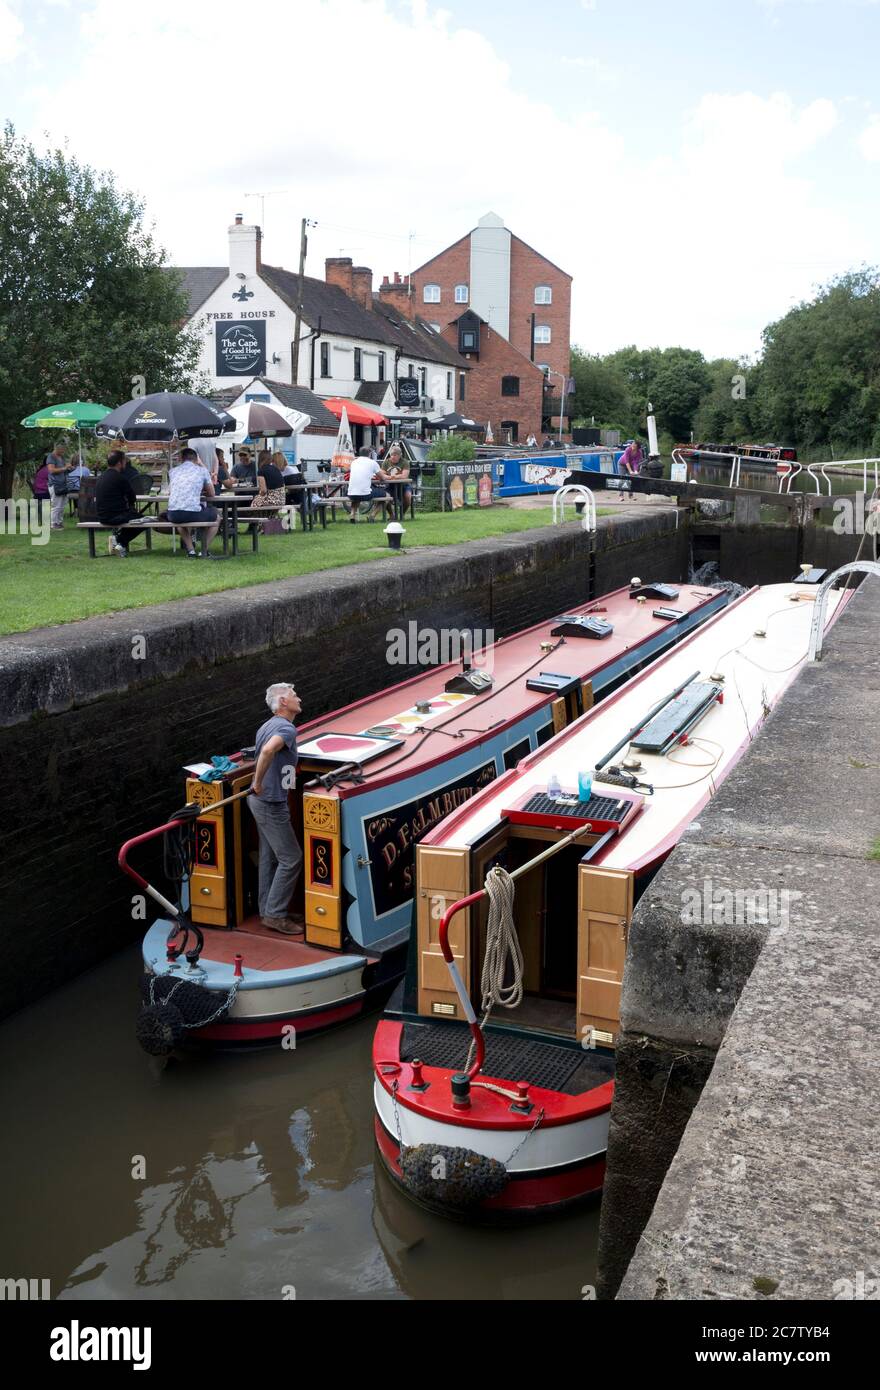 Narrowboats at Warwick Top Lock with people outside The Cape of Good Hope Pub during the easing of Covid-19 lockdown, Warwick, UK. 19th July 2020. Stock Photo